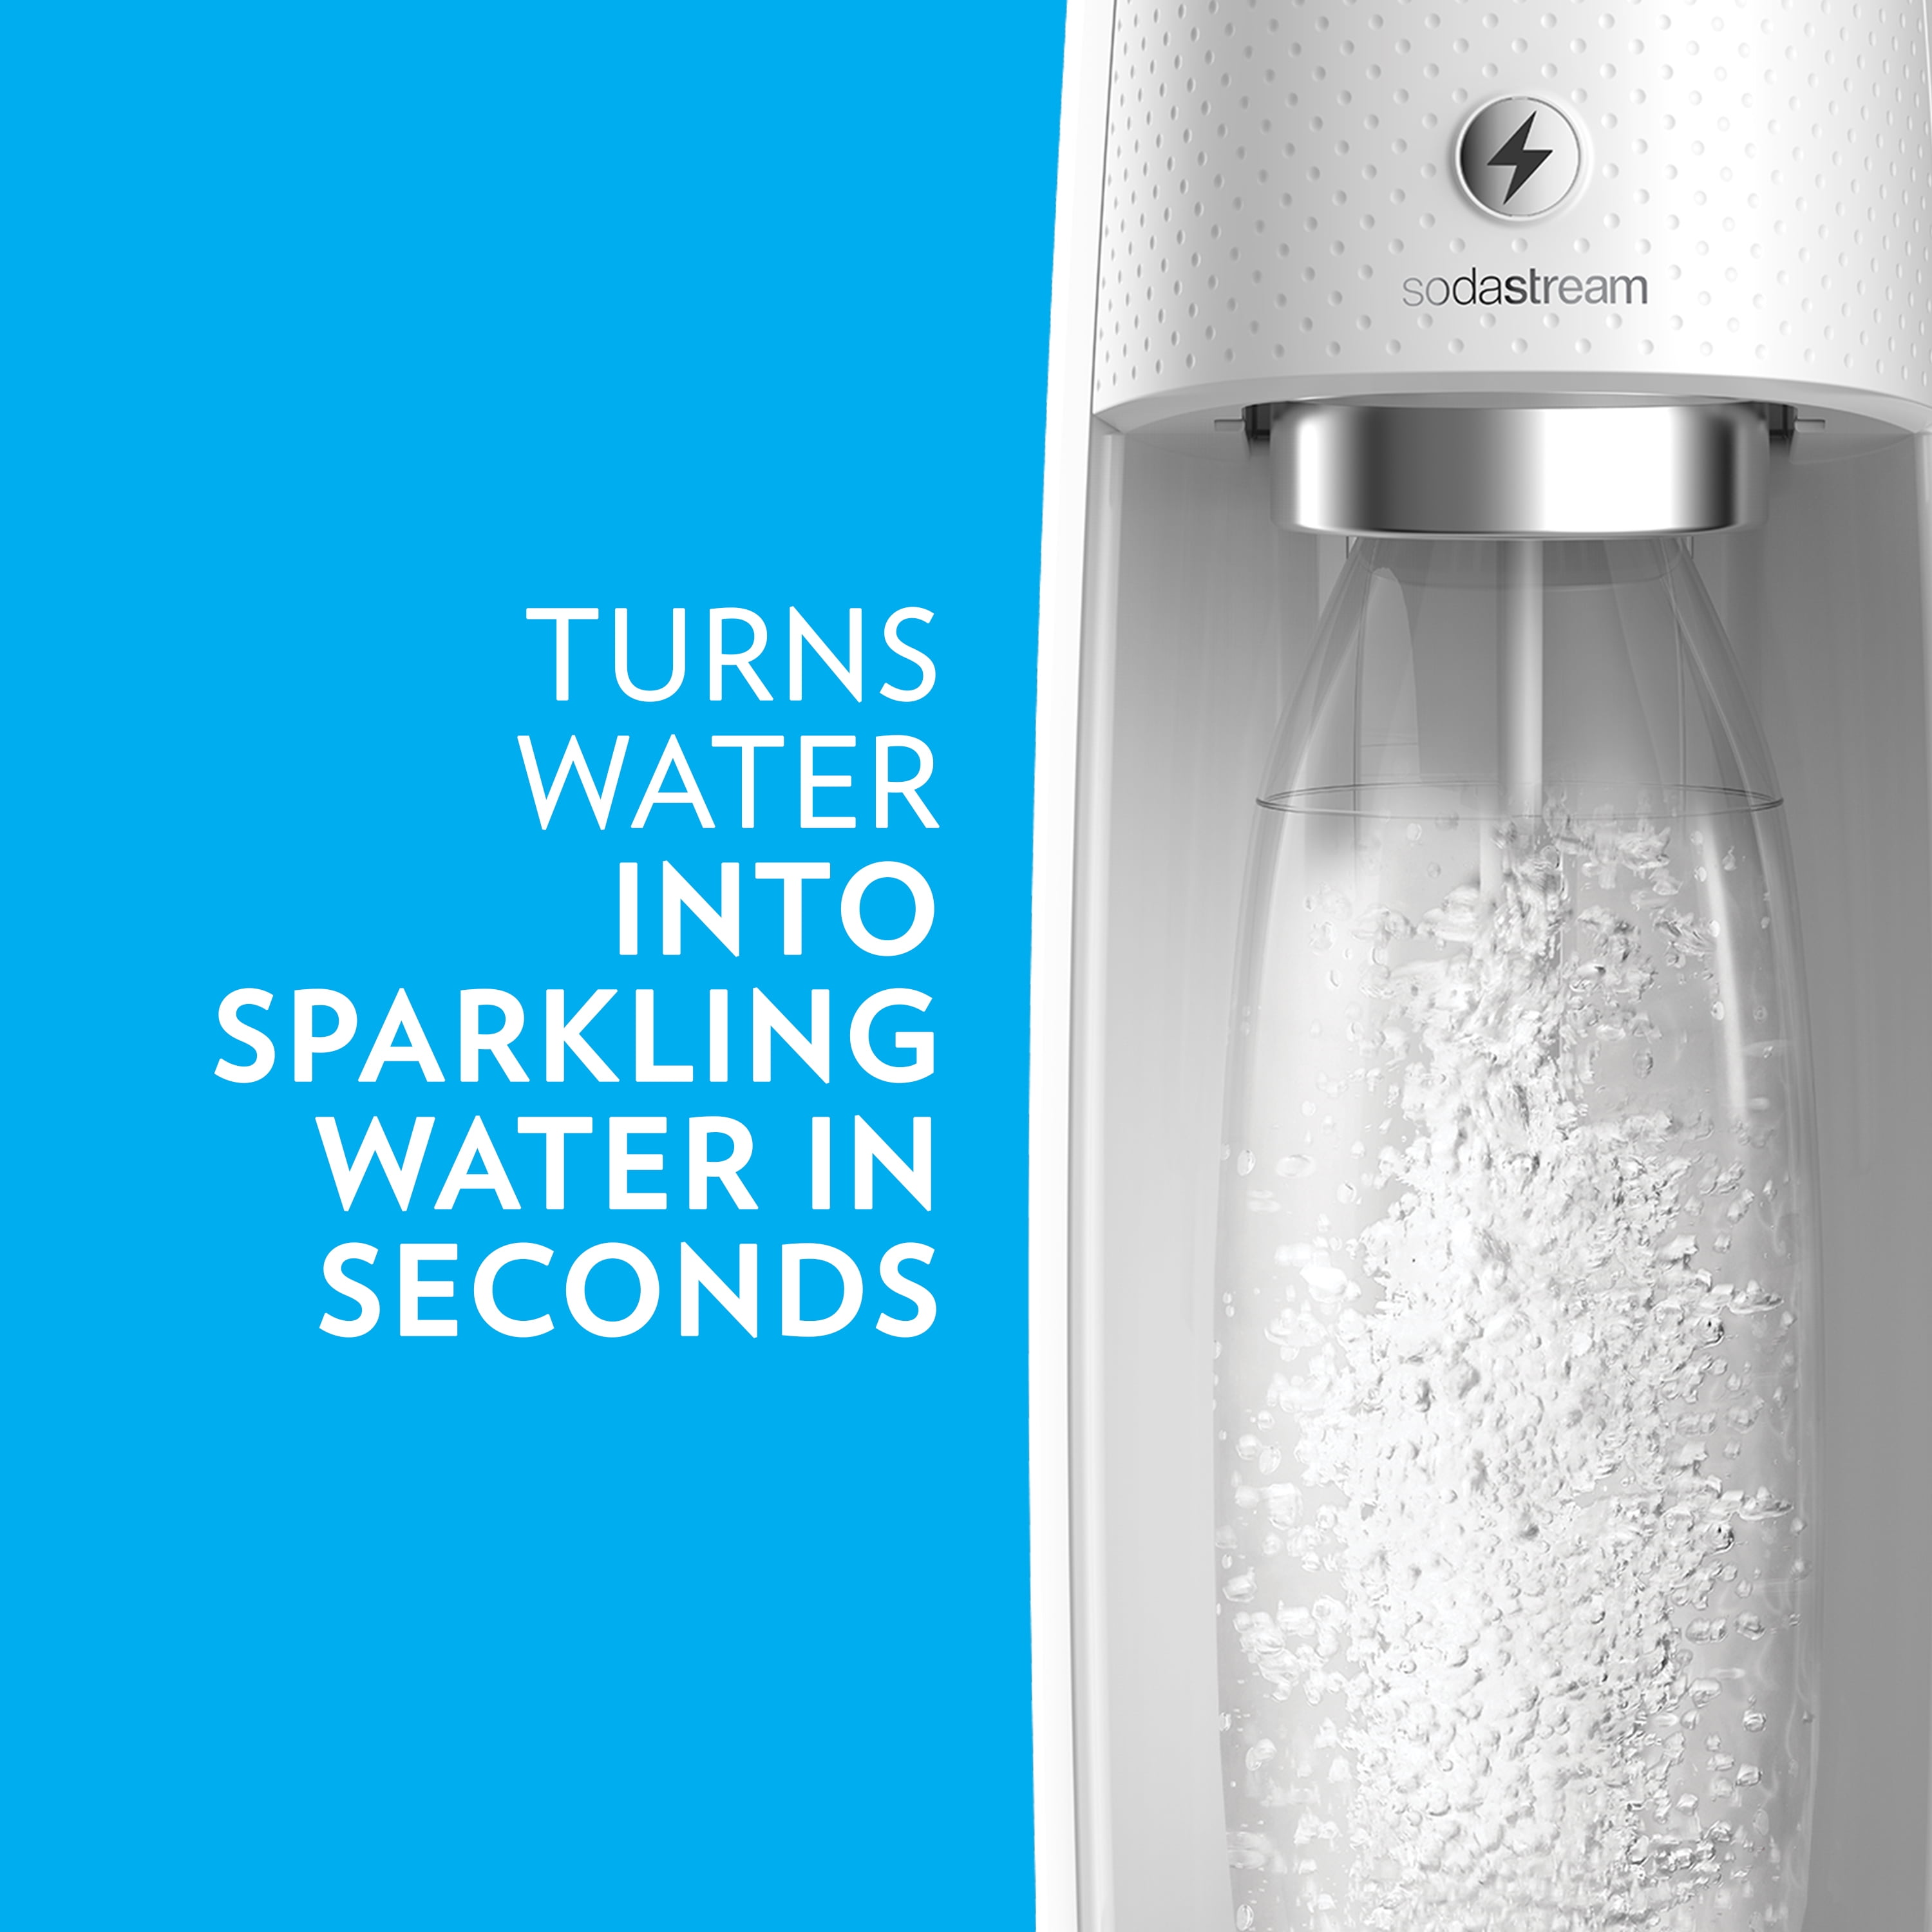 SodaStream One Touch Sparkling Water Maker (White) with CO2 and 